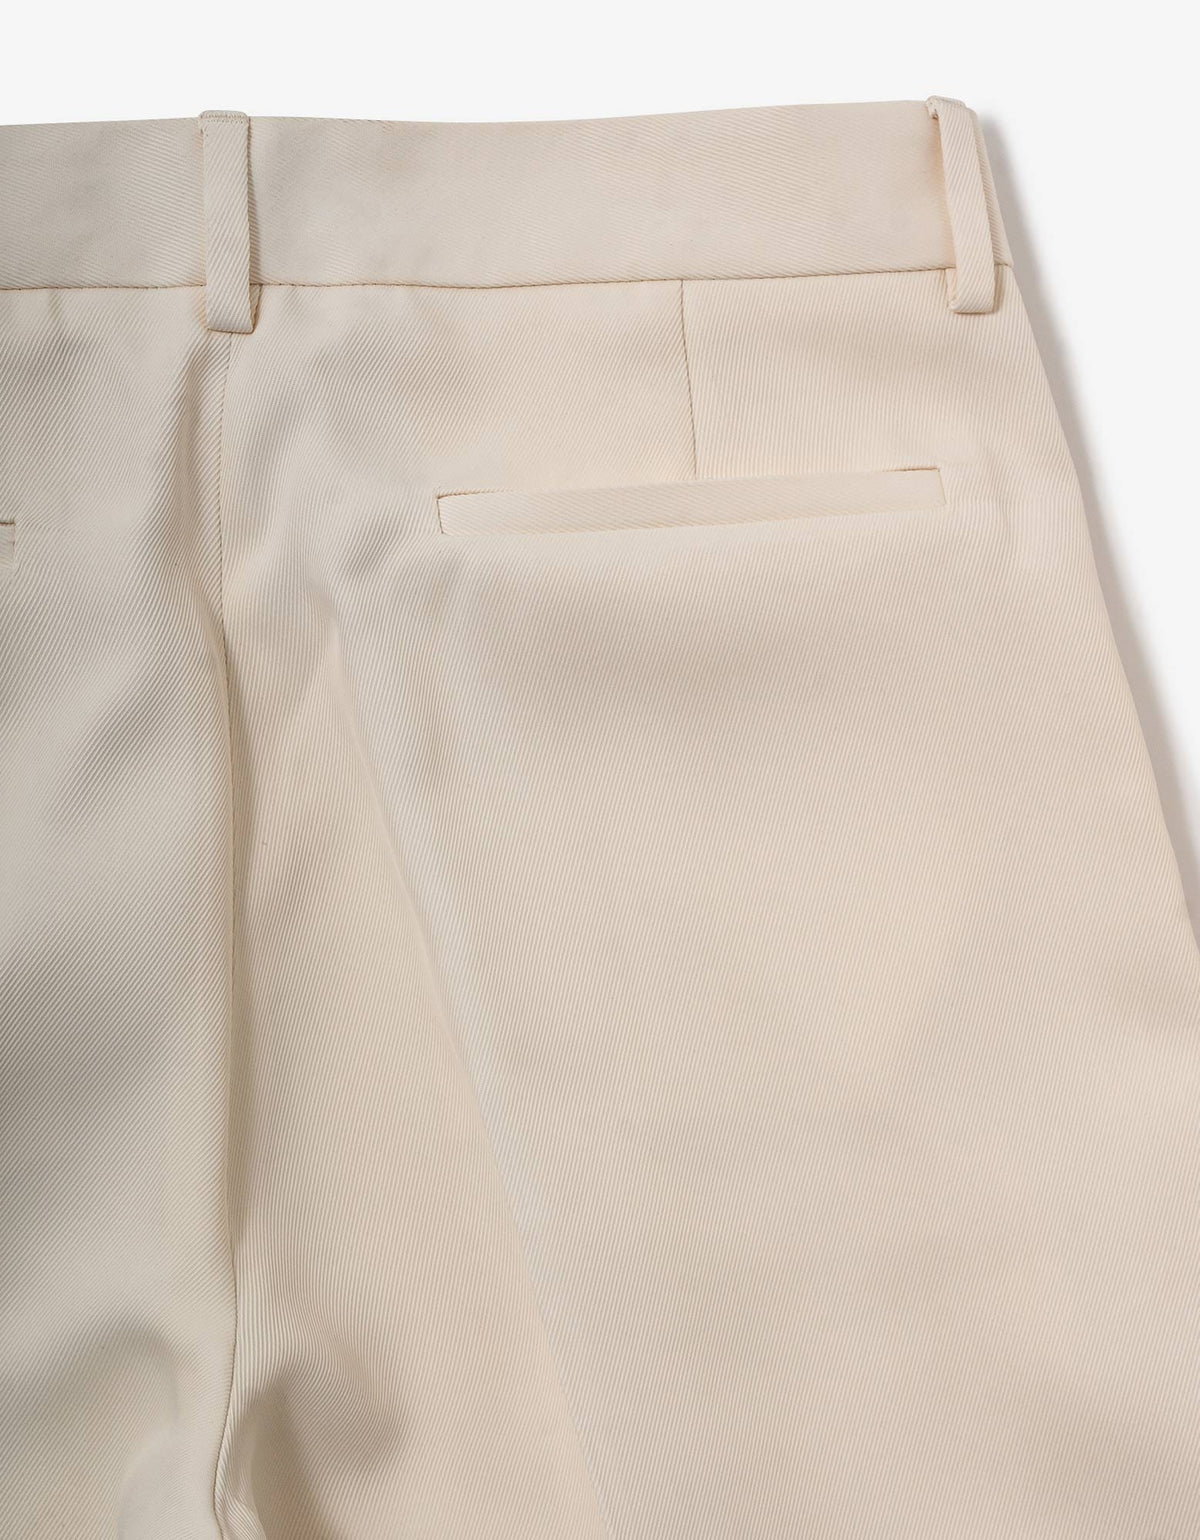 Amiri Off White Double Pleated Trousers